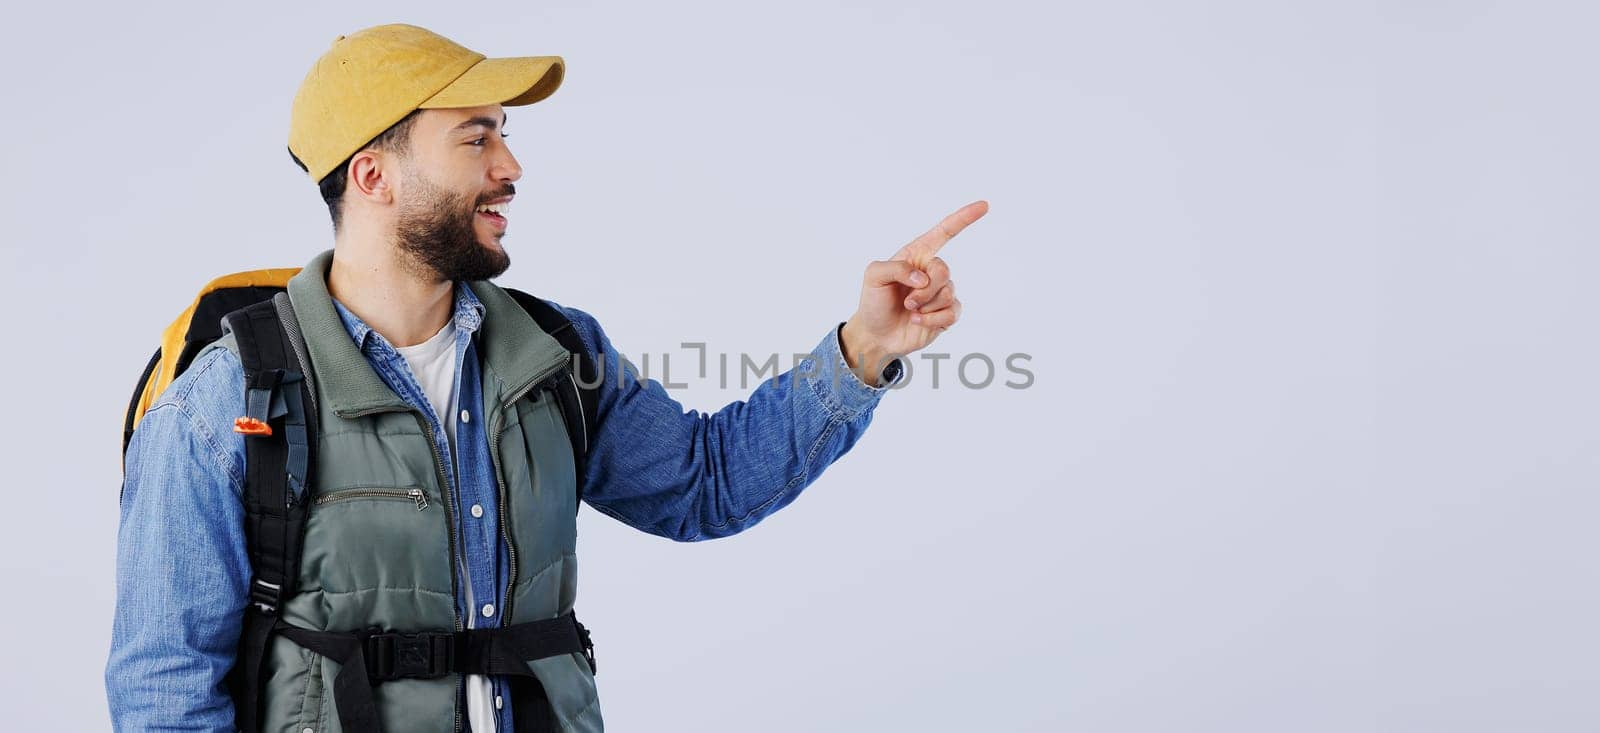 Happy man, backpack and pointing on mockup for hiking, adventure or travel tips against a studio background. Male person, model or hiker smile with bag showing trekking list, deal or advertising.